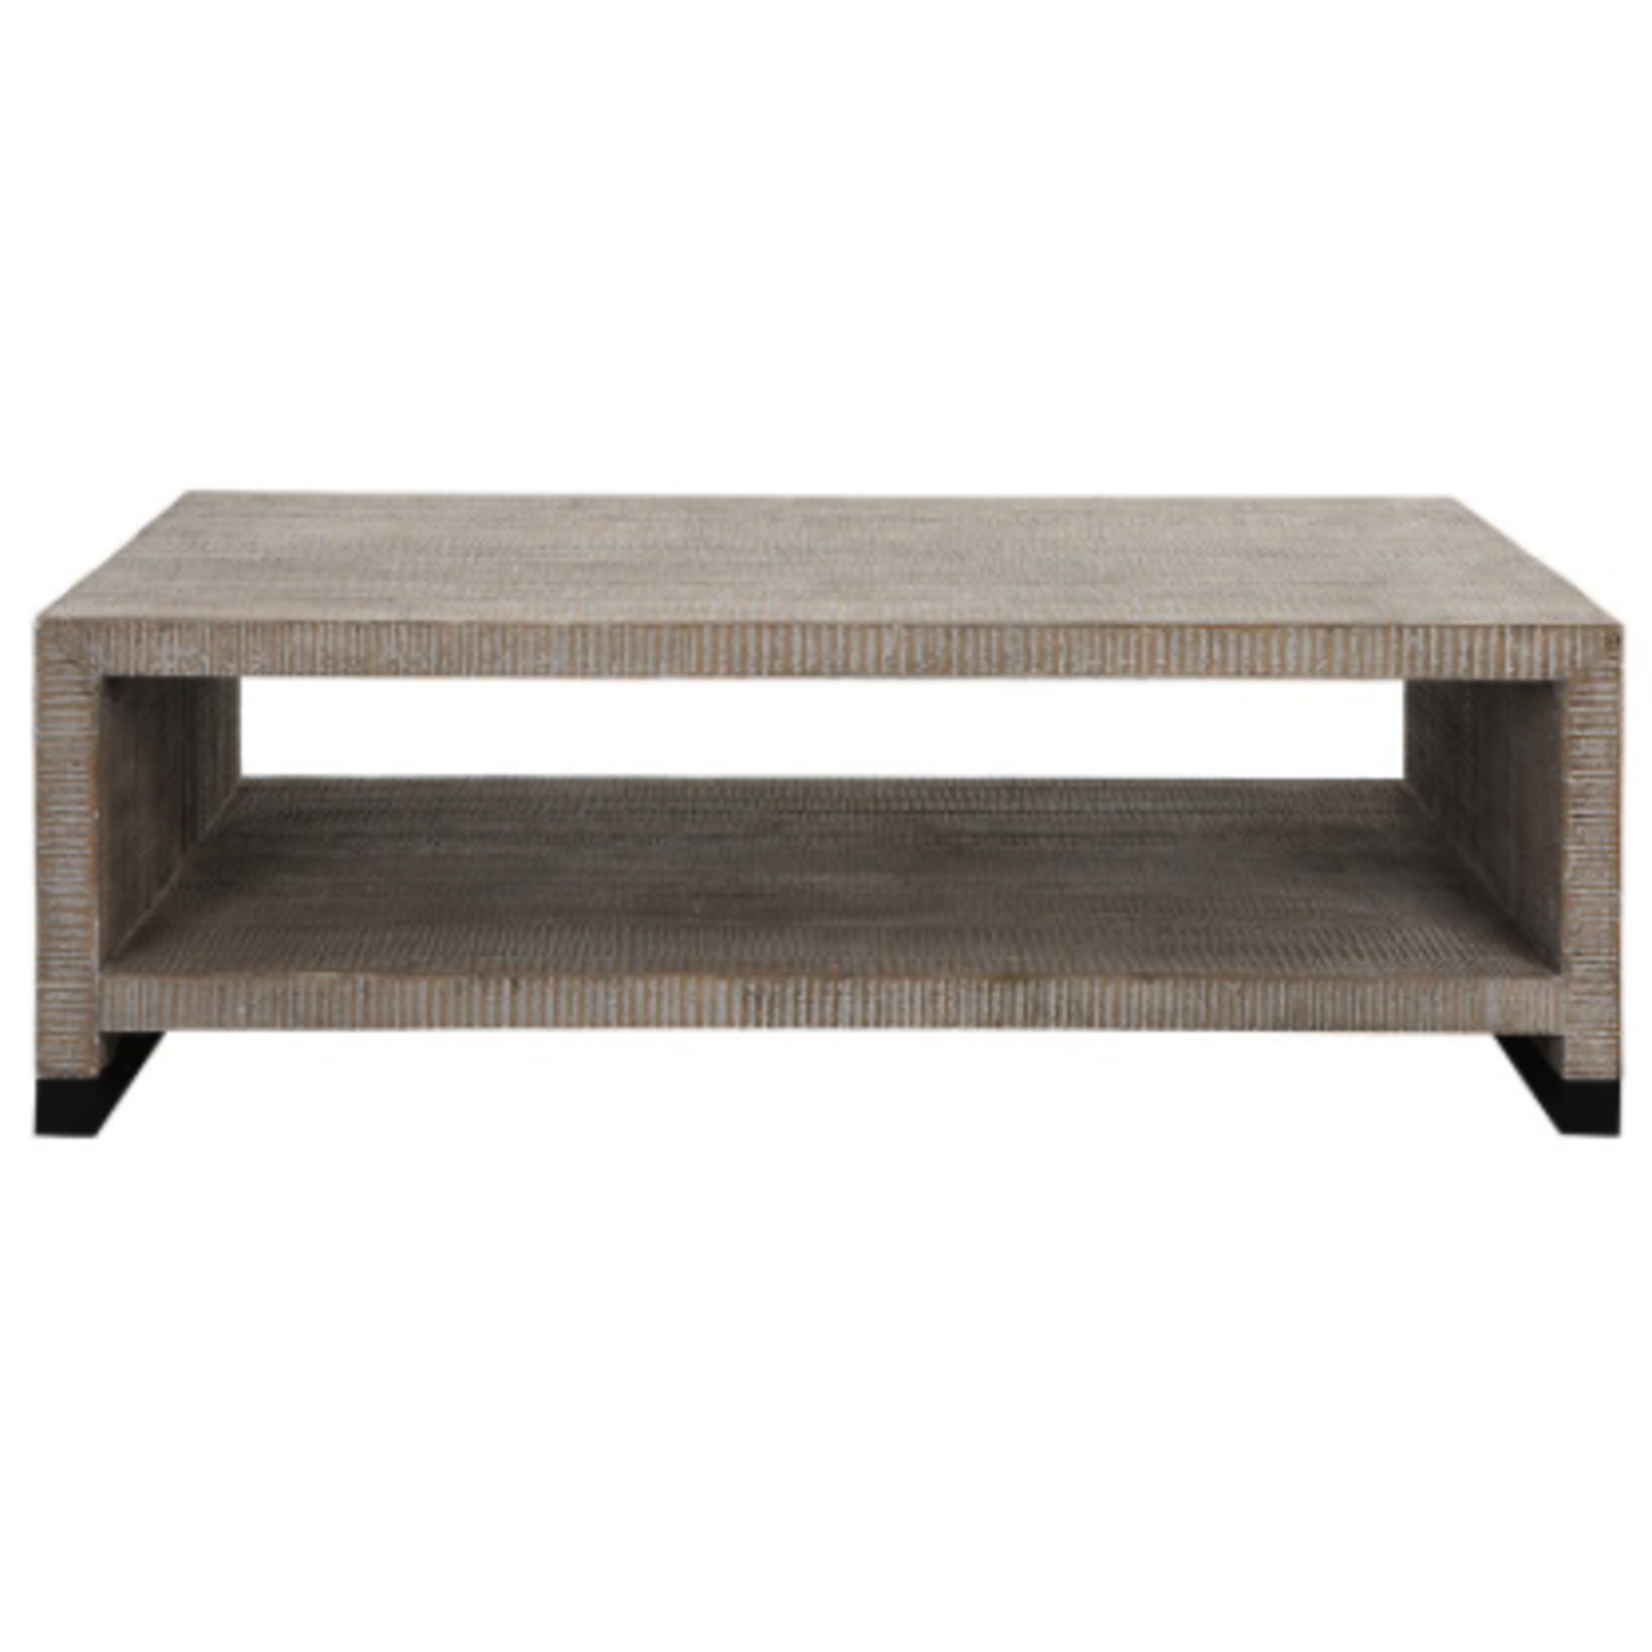 Outside The Box 54x30x18 Bosk White Wash Wood Coffee Table